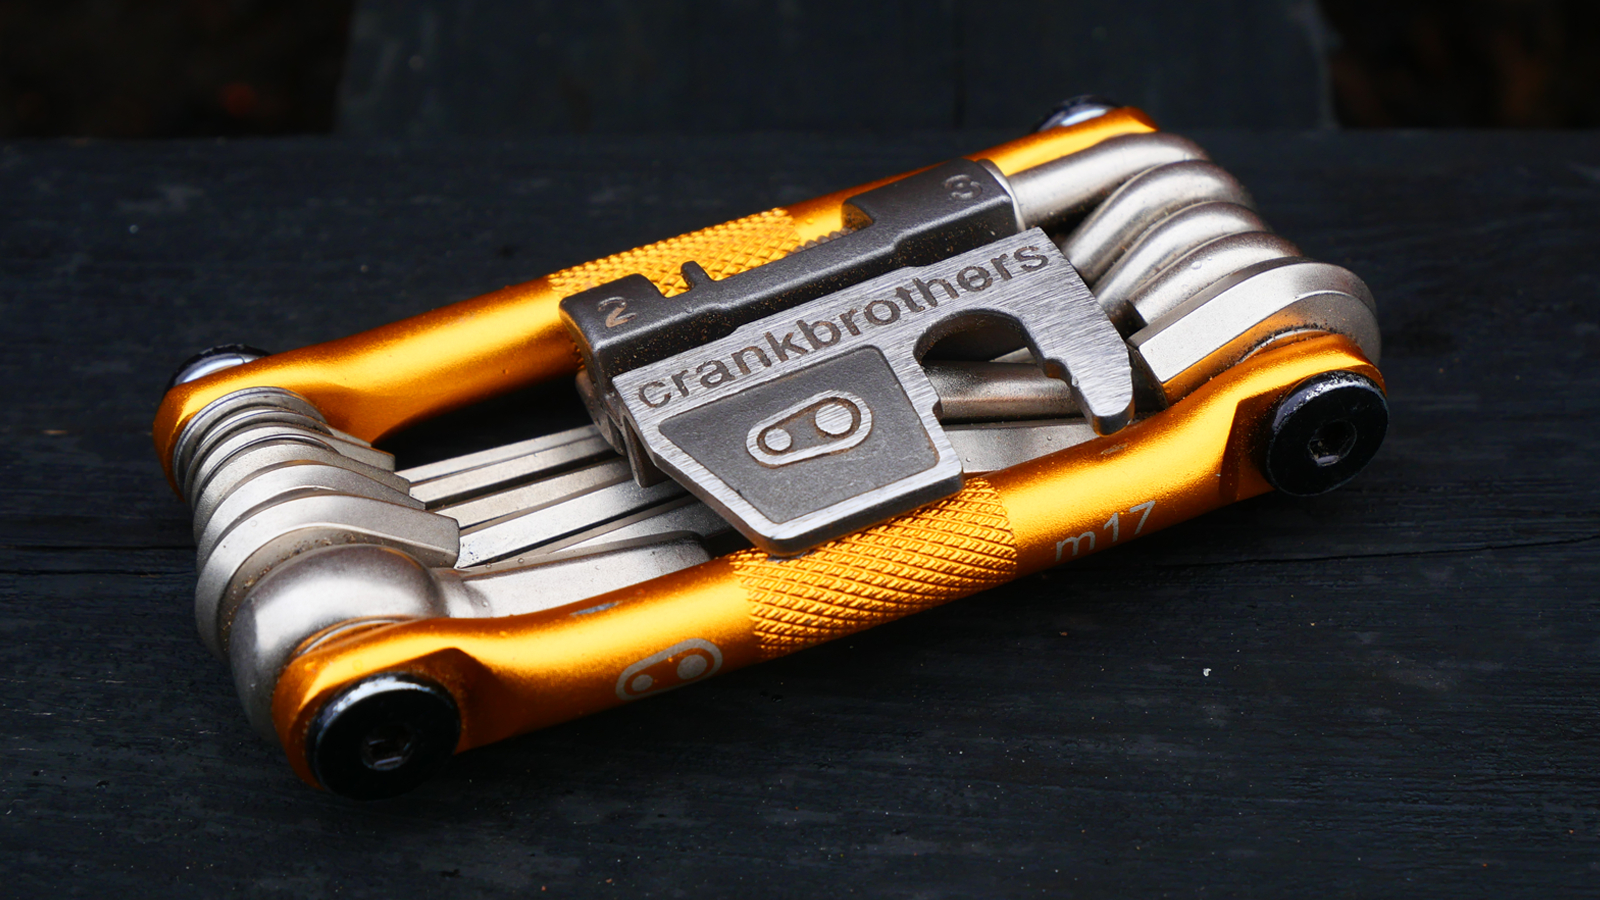 Crankbrothers m17 multi-tool review – a classic trailside multi-tool